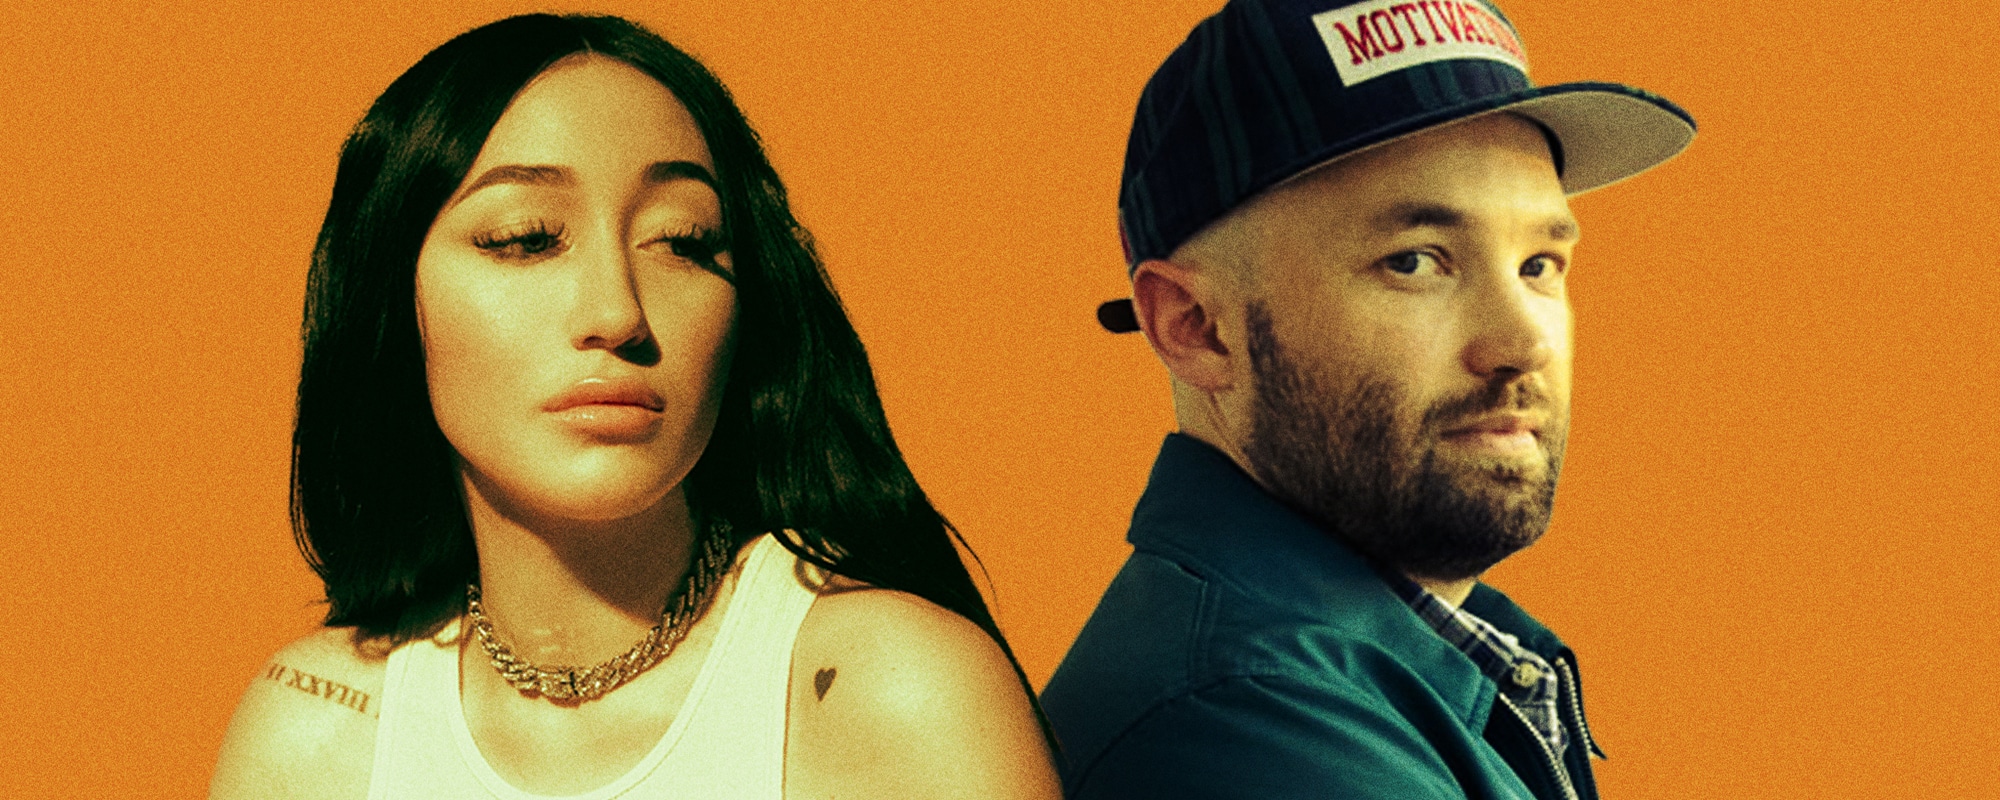 PJ Harding and Noah Cyrus Release Collaborative Single “You Belong To Somebody Else” in Anticipation of New EP